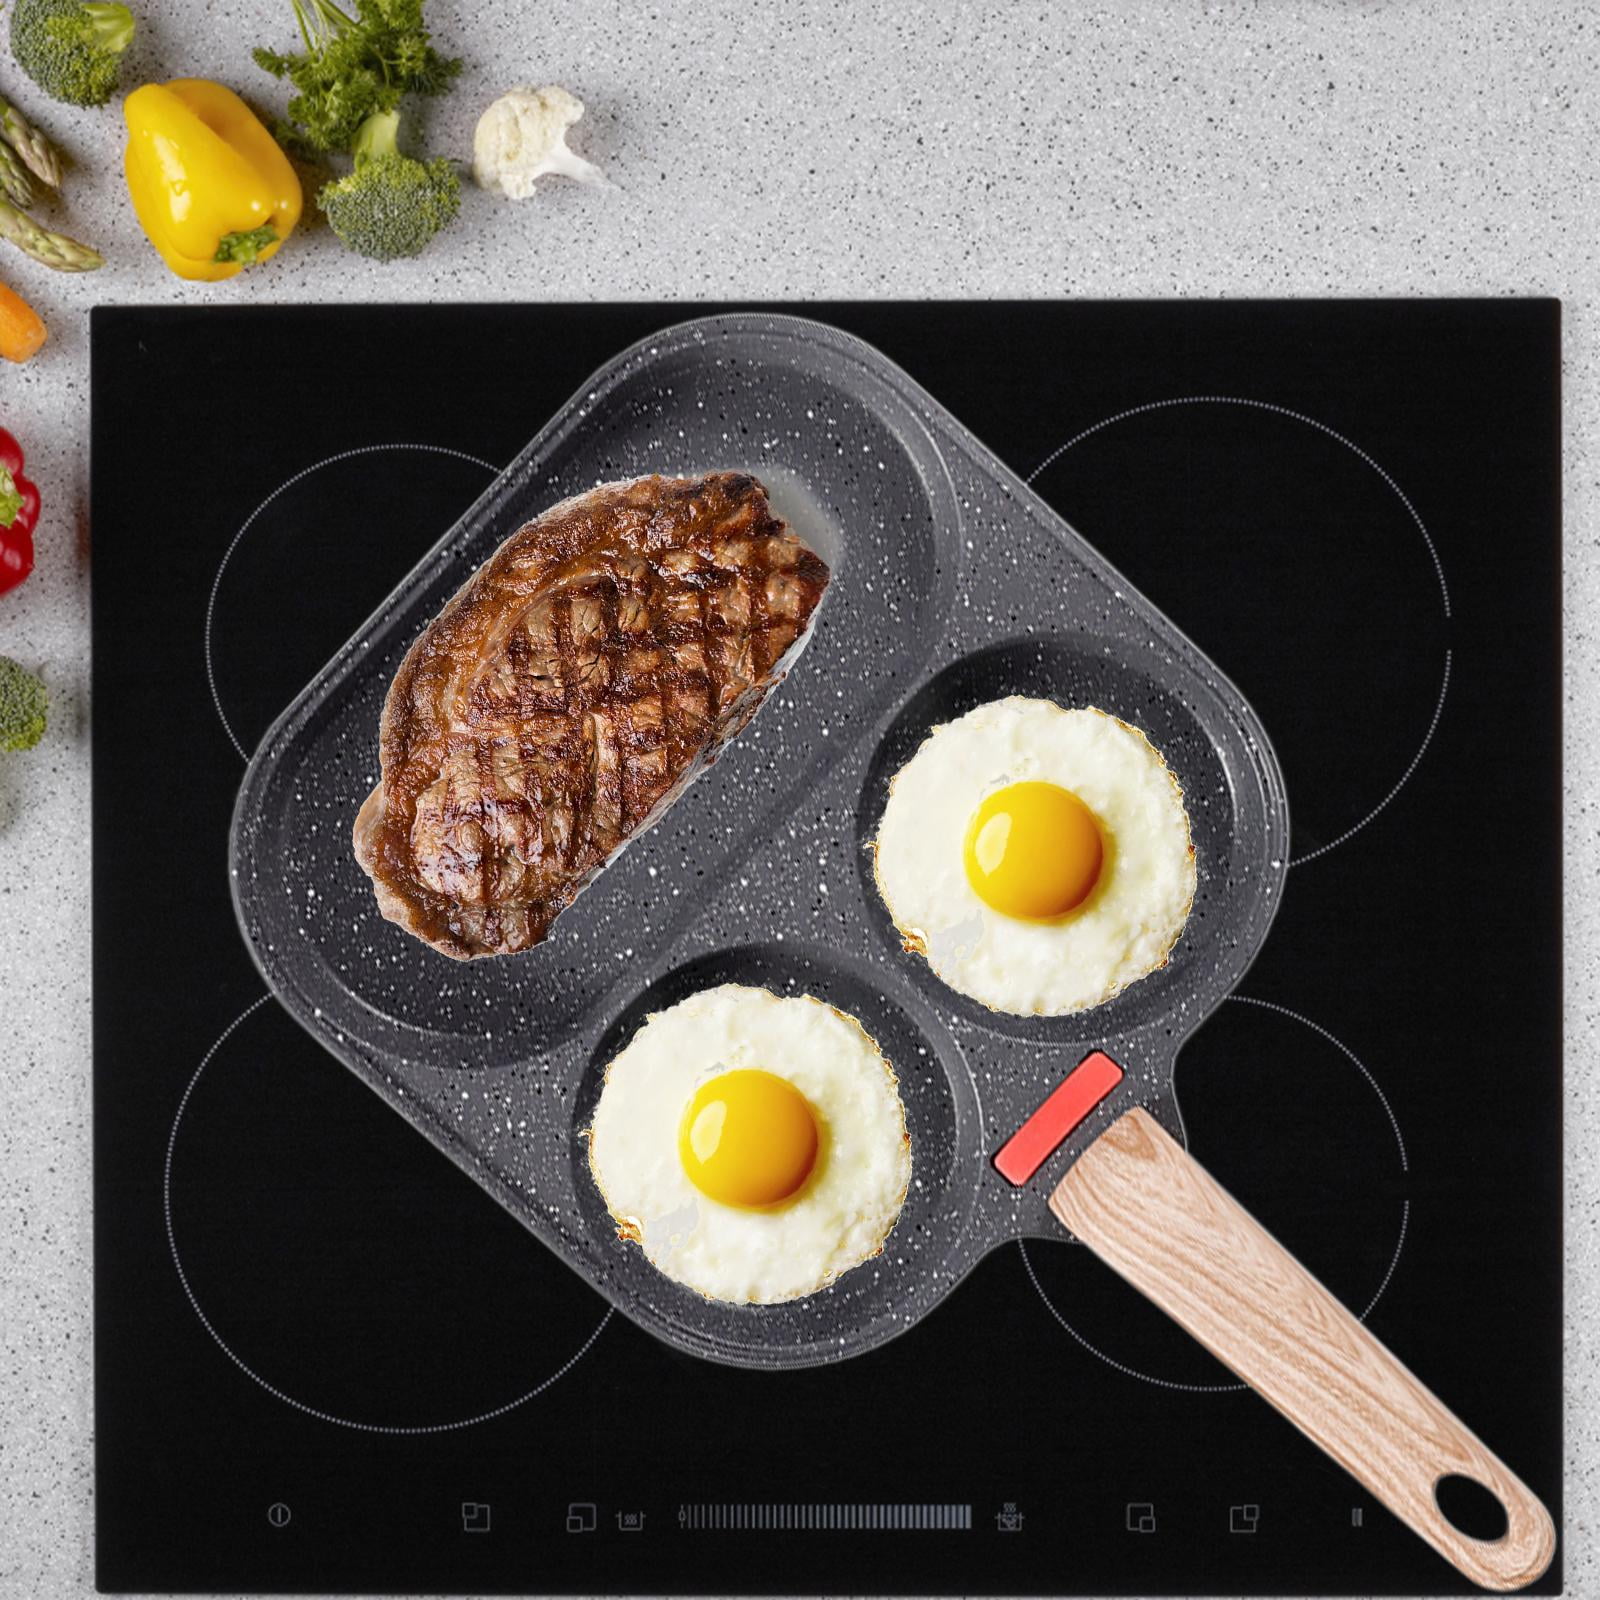 egg frying pan,pancake frying pan egg electric mini crepe,non stick maker  omelette fried multi skillet,scrambled non-stick induction hob small,cake  maker mould ,cooker flat griddle poached 